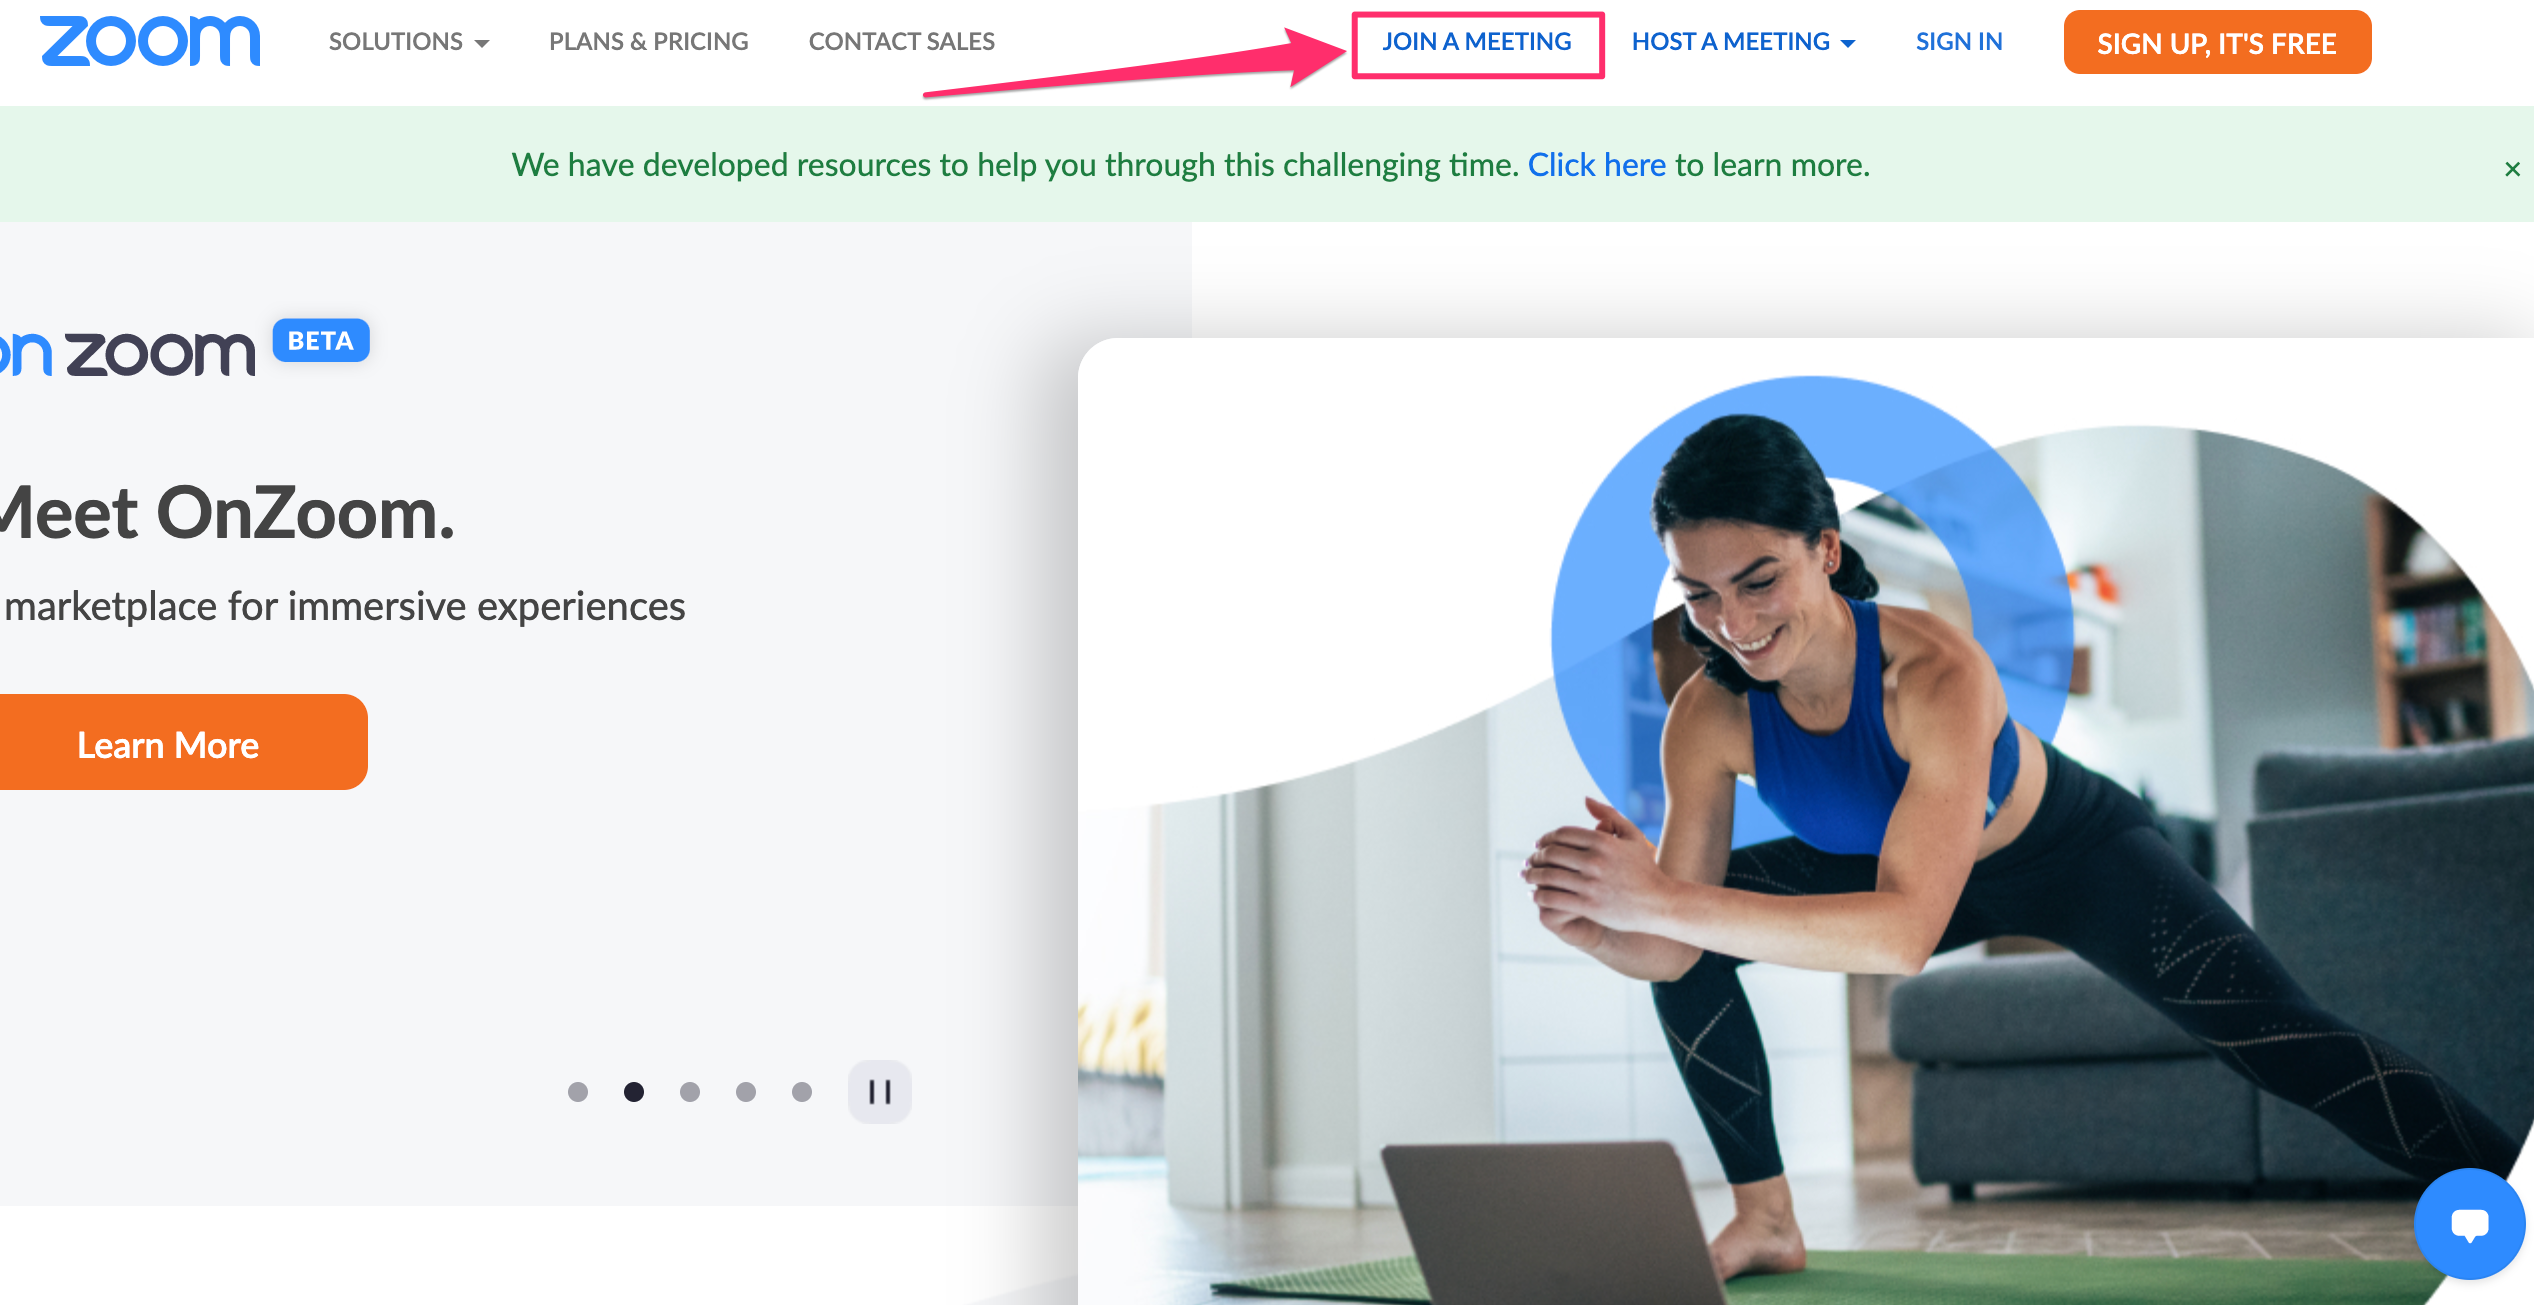 How to join a Zoom meeting with an invite link or Meeting ID on any device